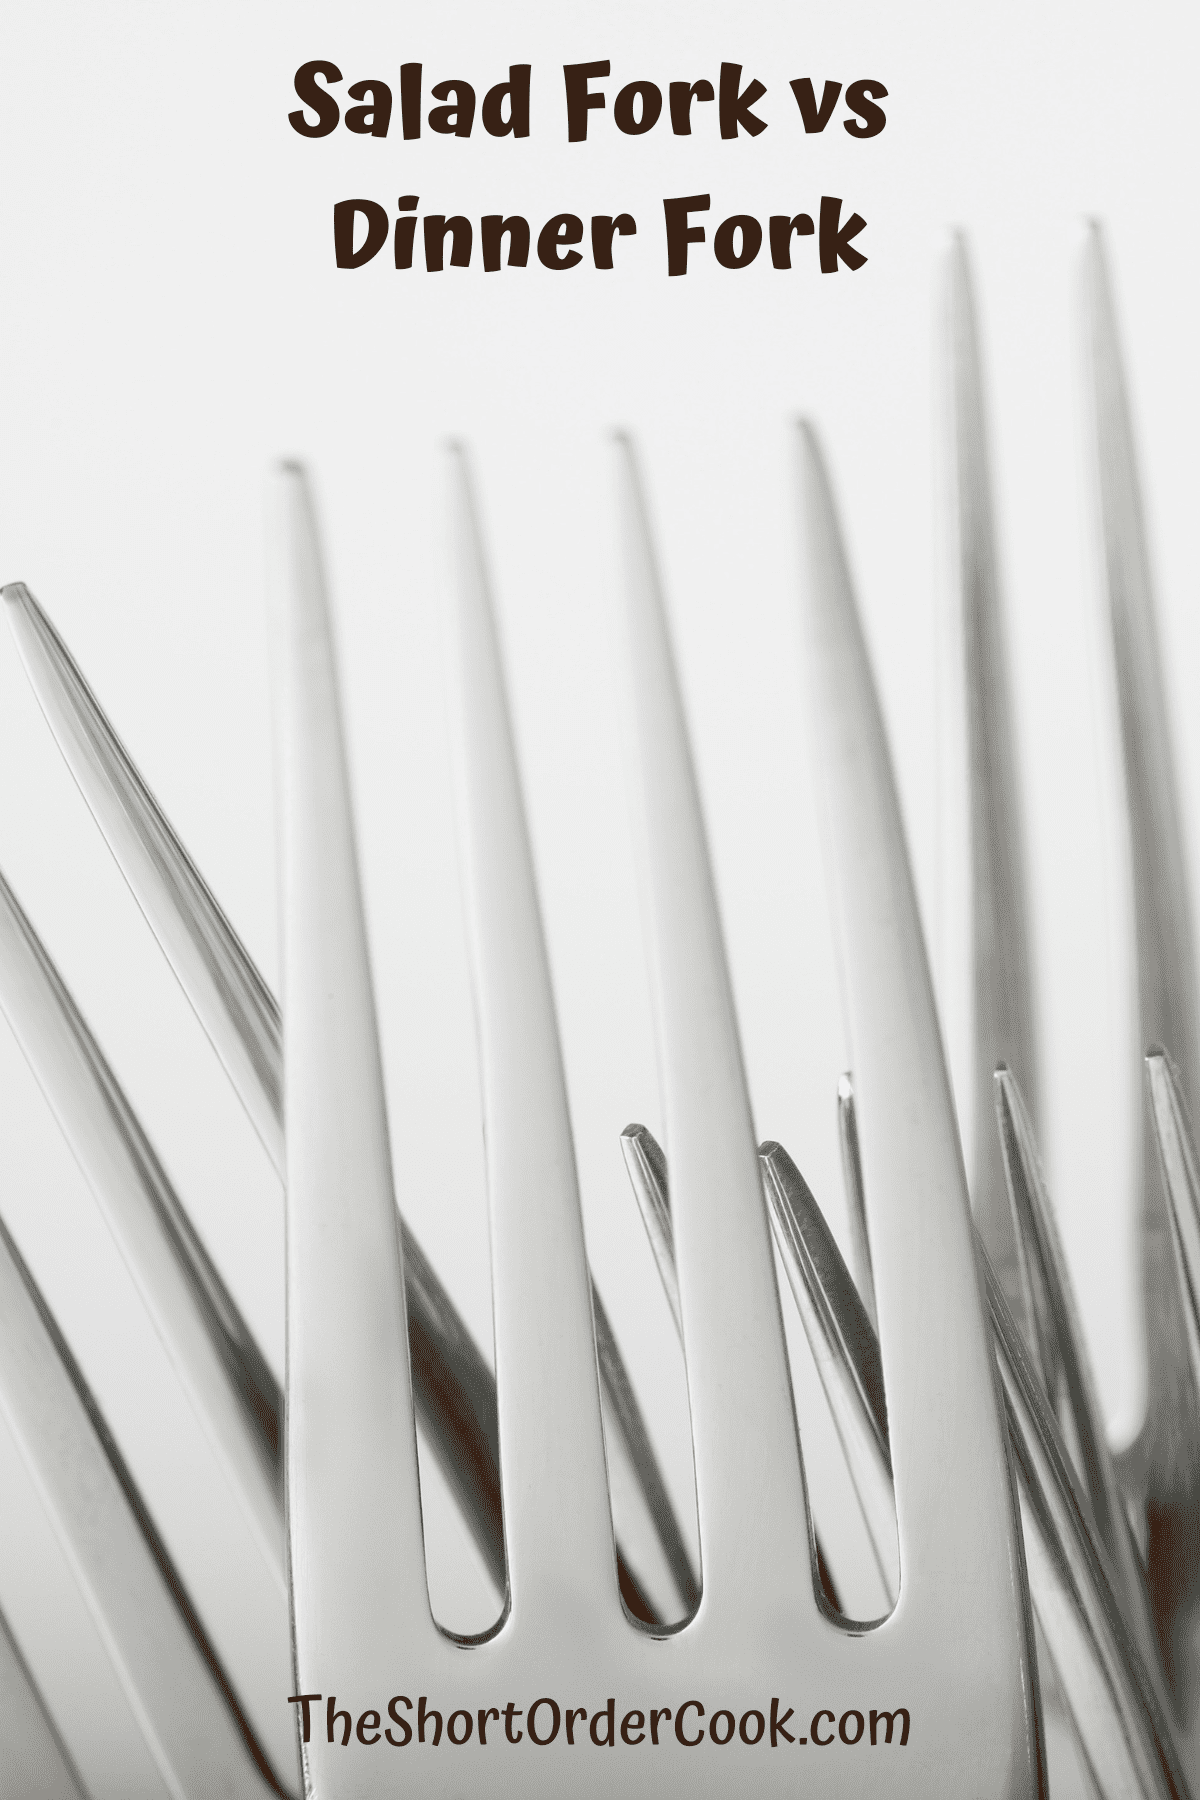 Several forks with a white background.